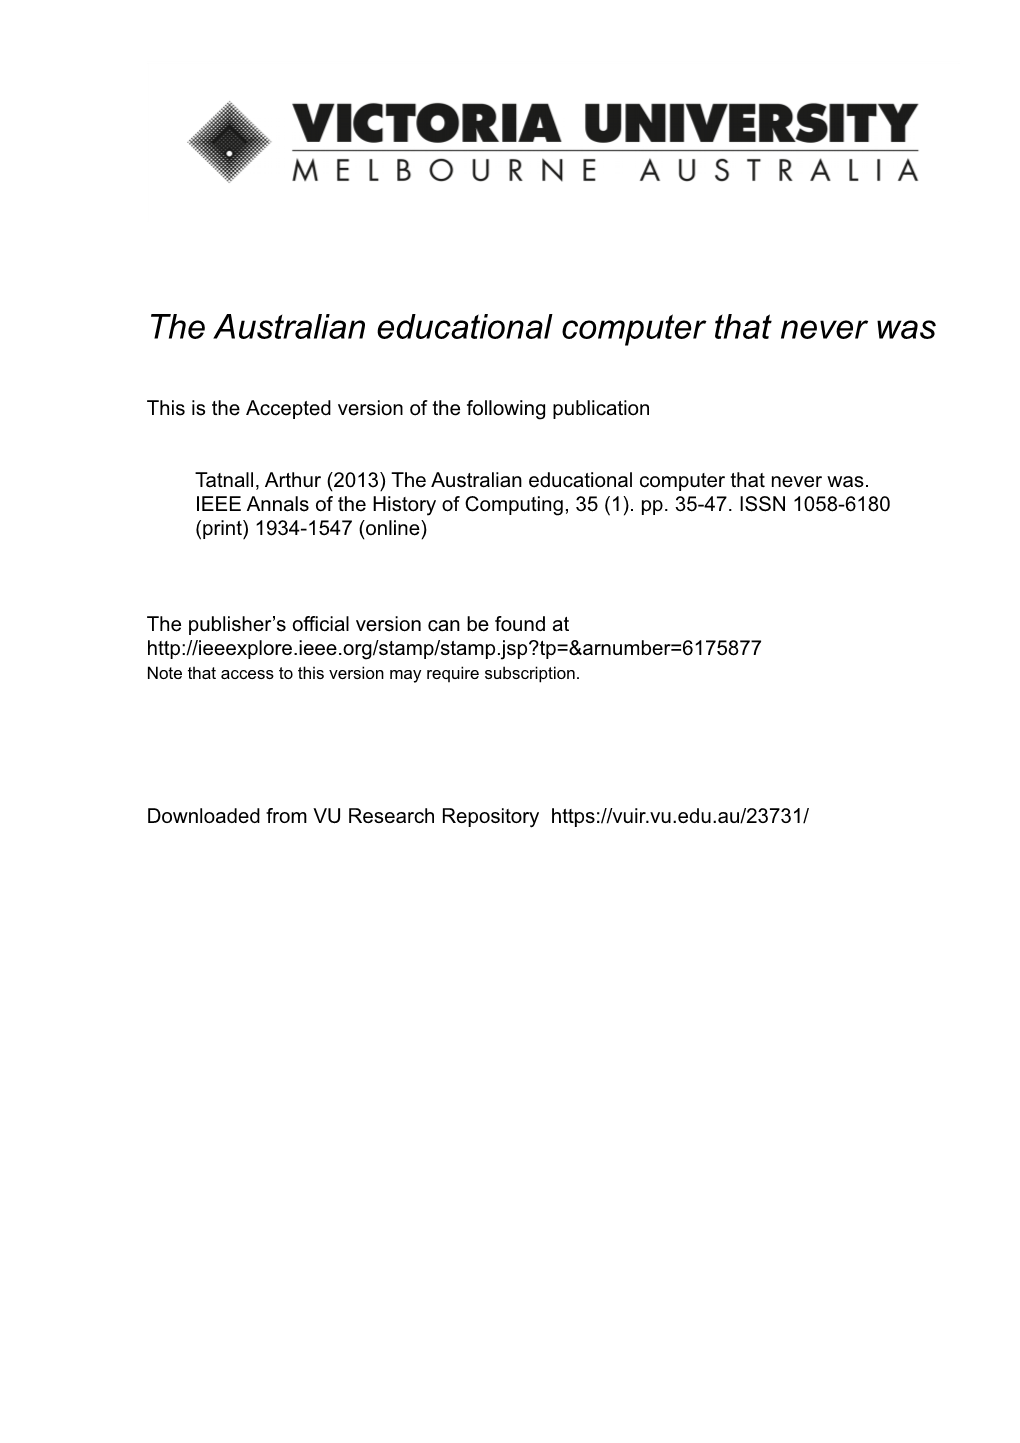 The Australian Educational Computer That Never Was